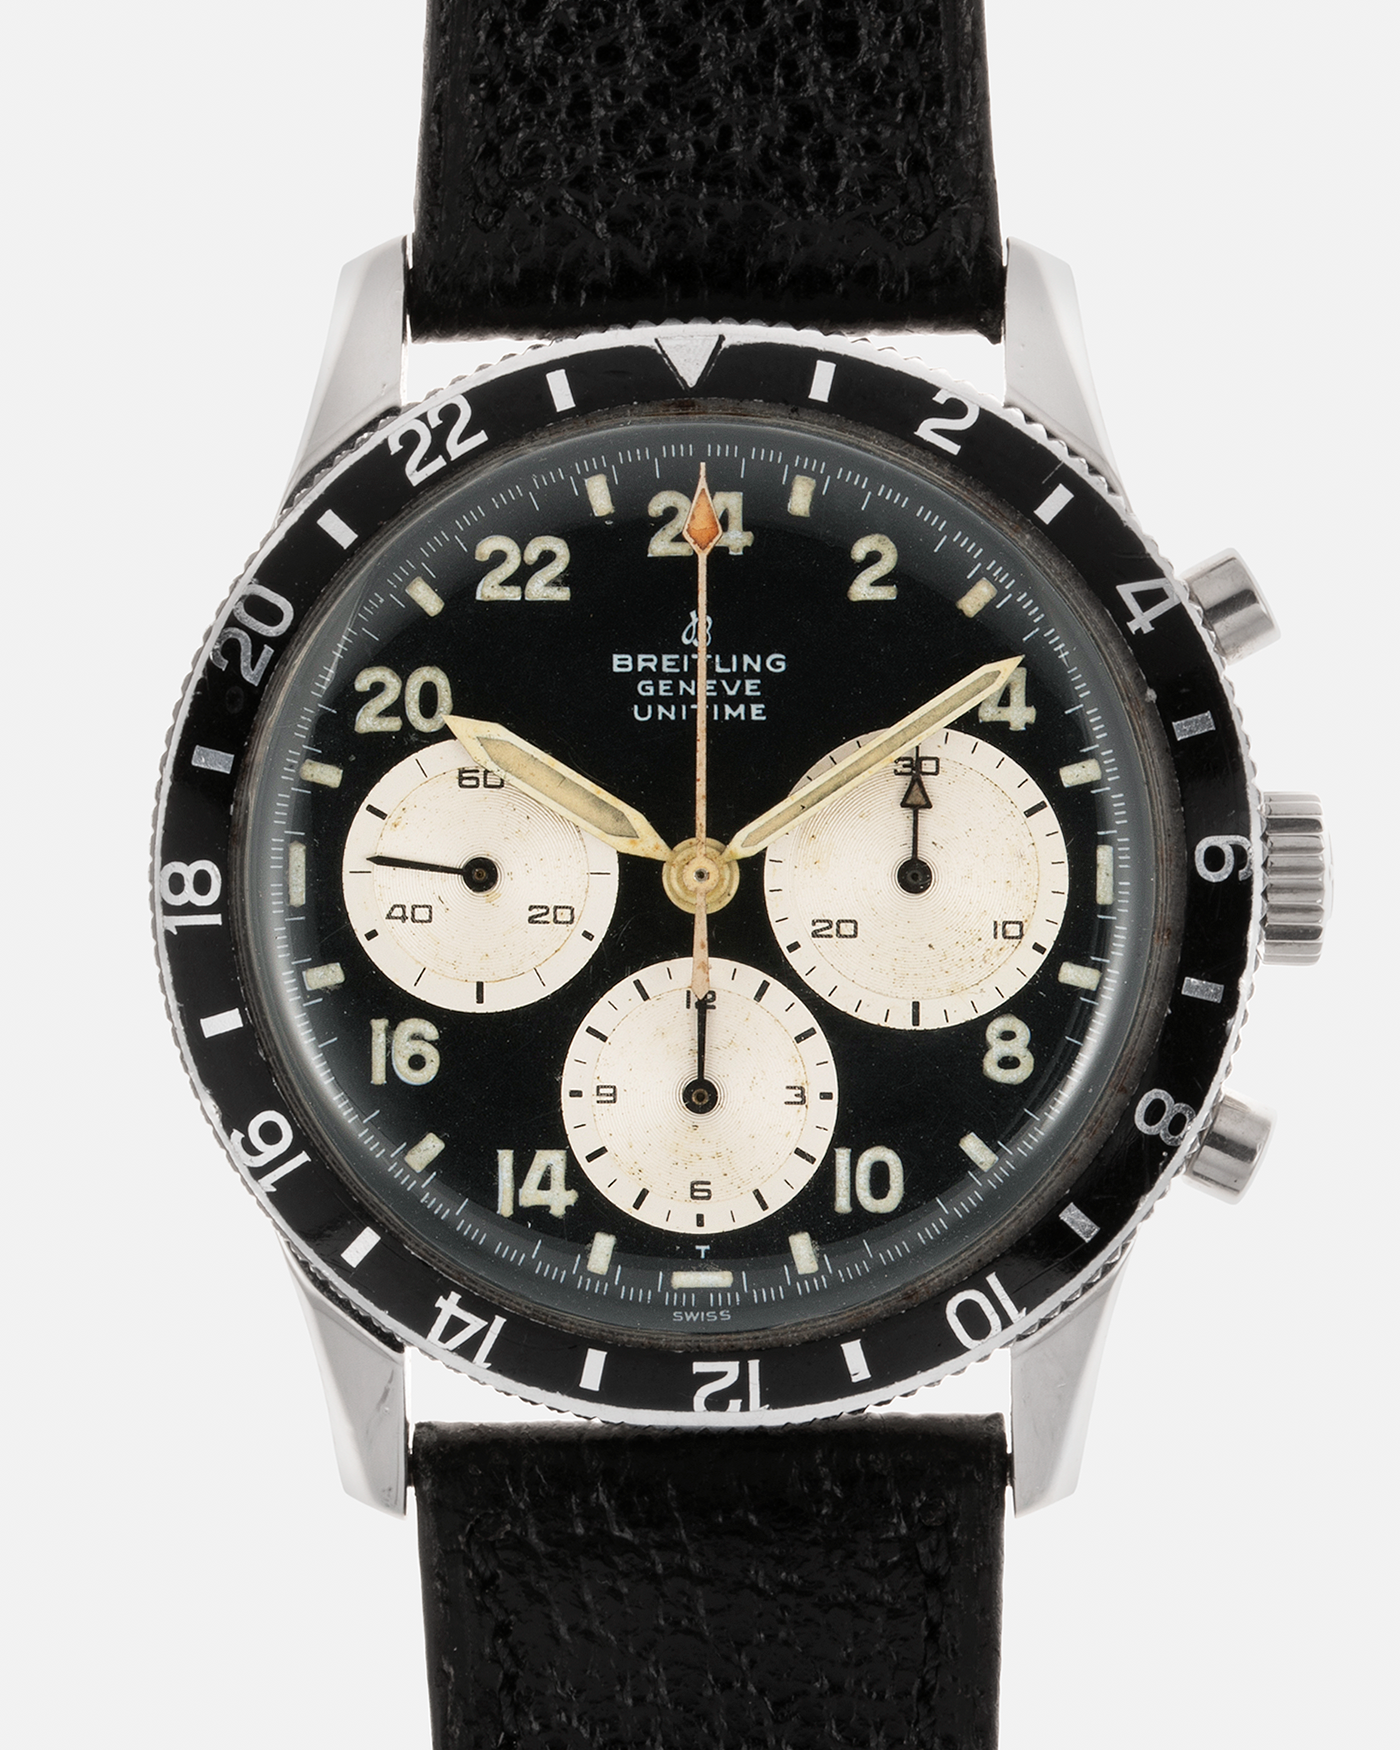 Brand: Breitling Year: Late 1960s Model: Unitime Reference Number: 1765 Material: Stainless Steel Movement: Venus Cal. 178, Manual-Winding Case Diameter: 41mm Strap: Generic Black Textured Calf Leather Strap